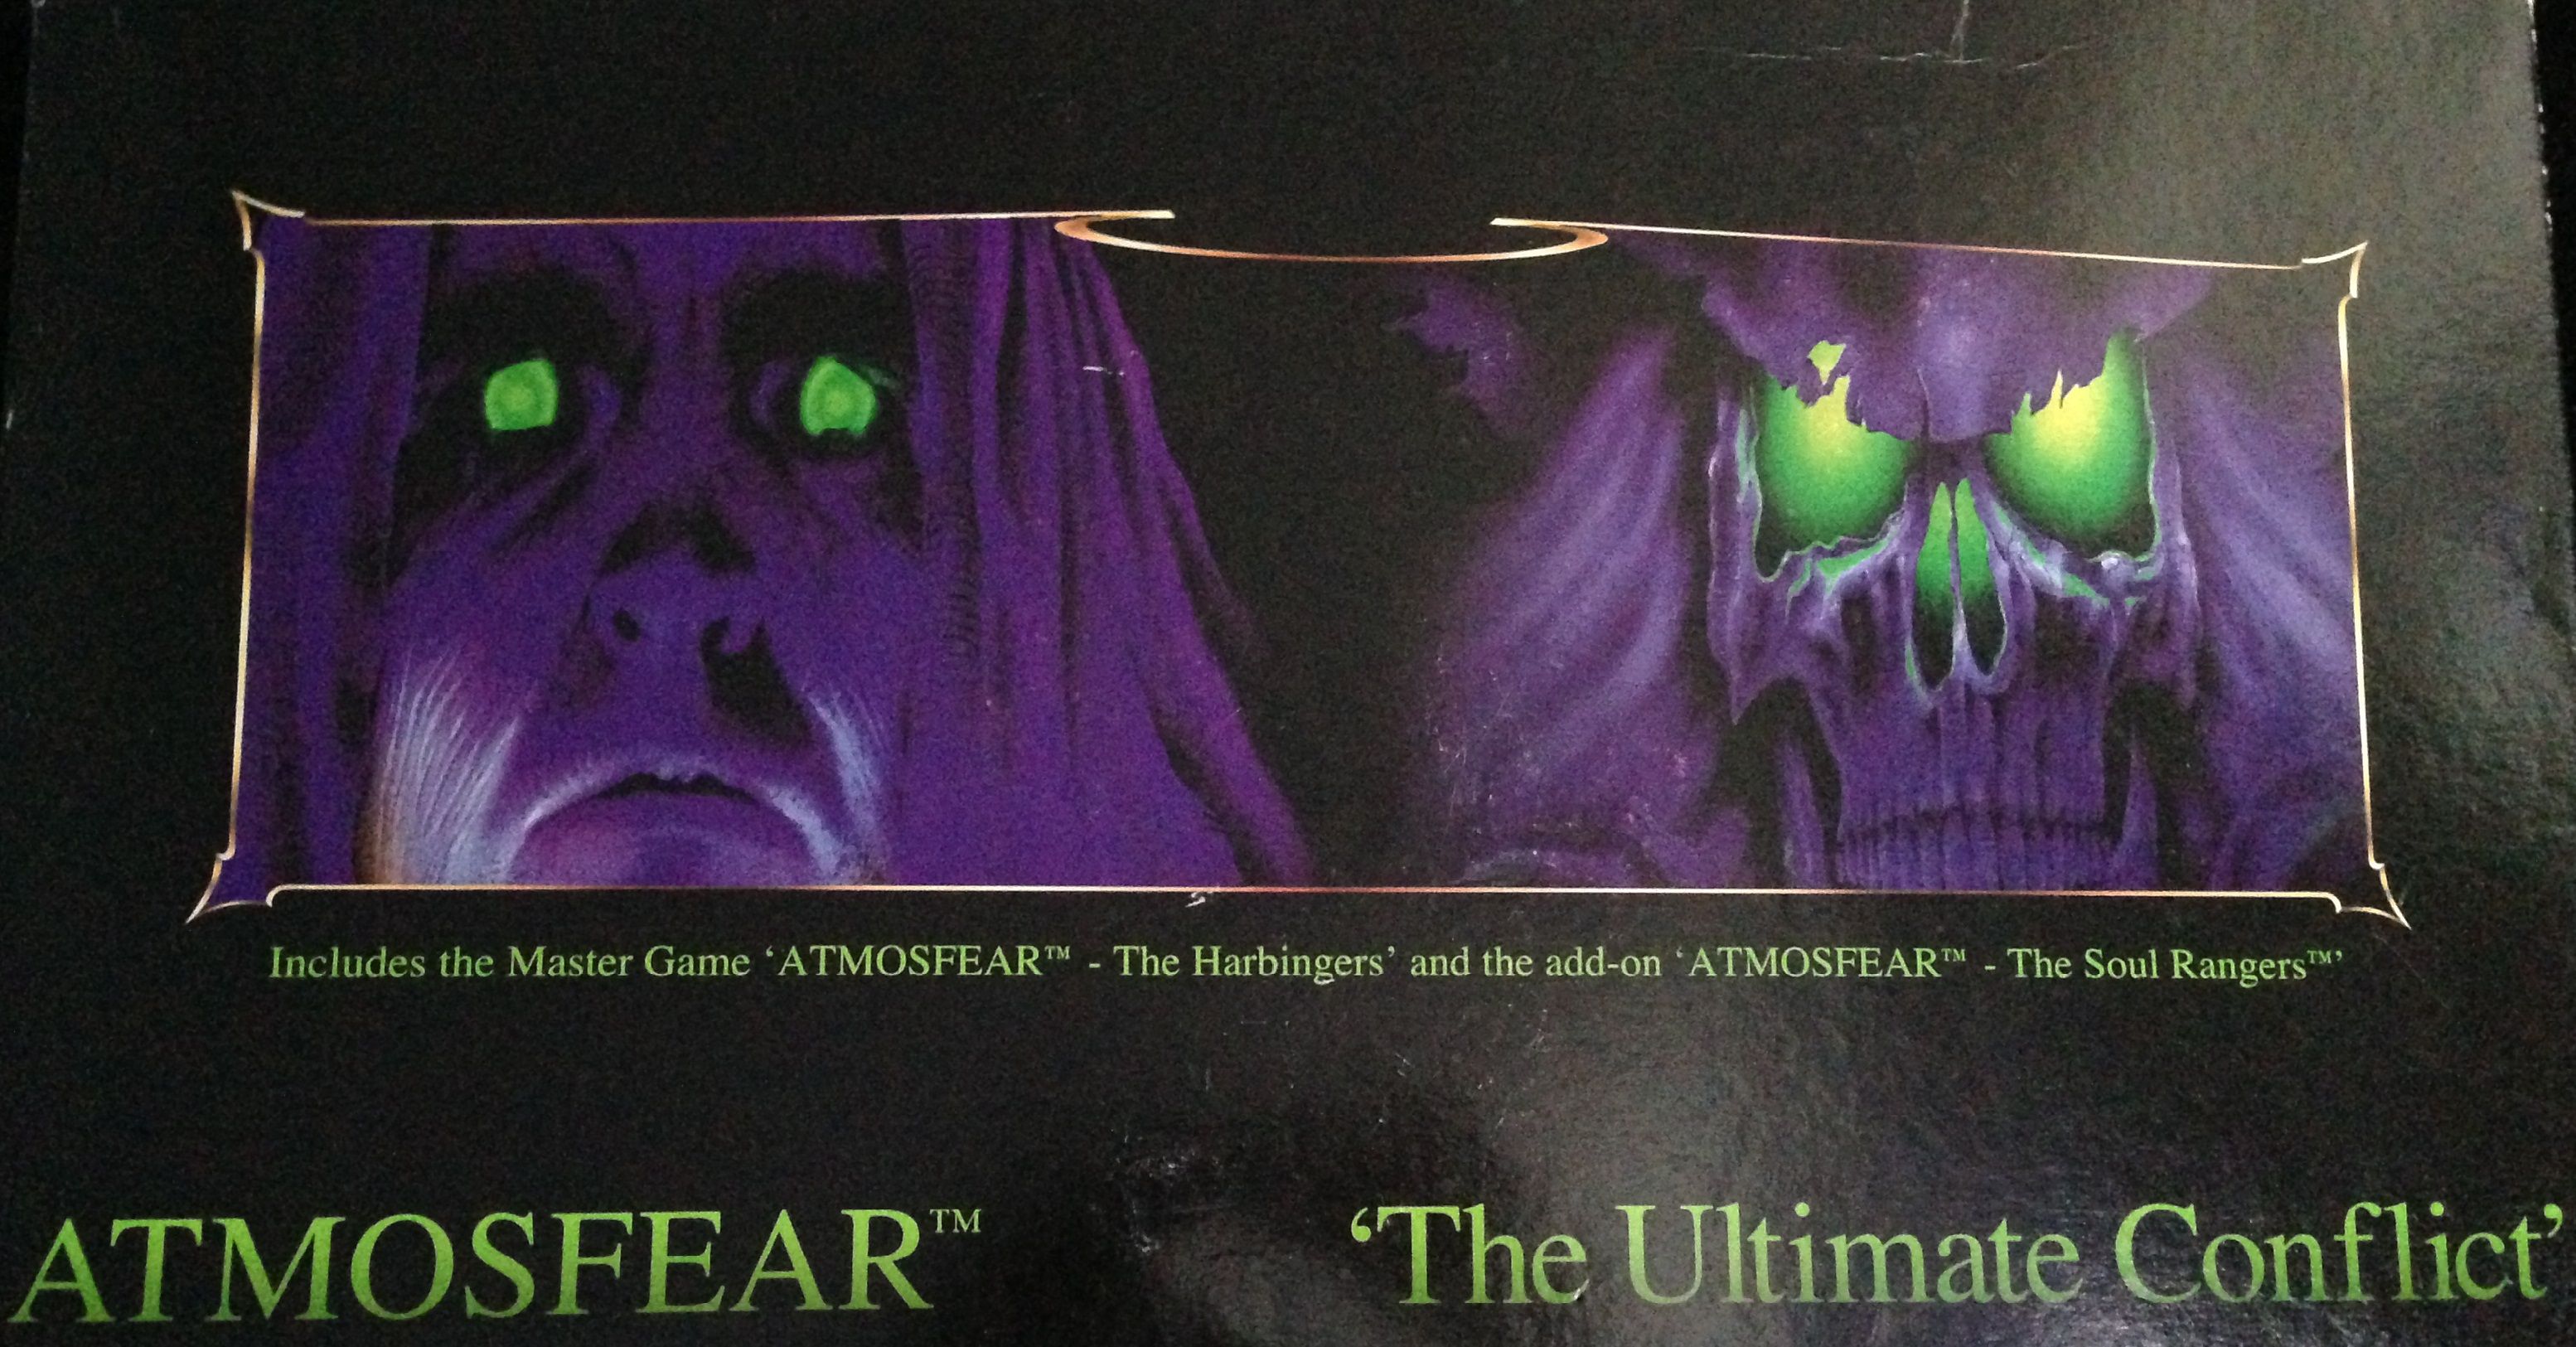 Atmosfear: The Ultimate Conflict